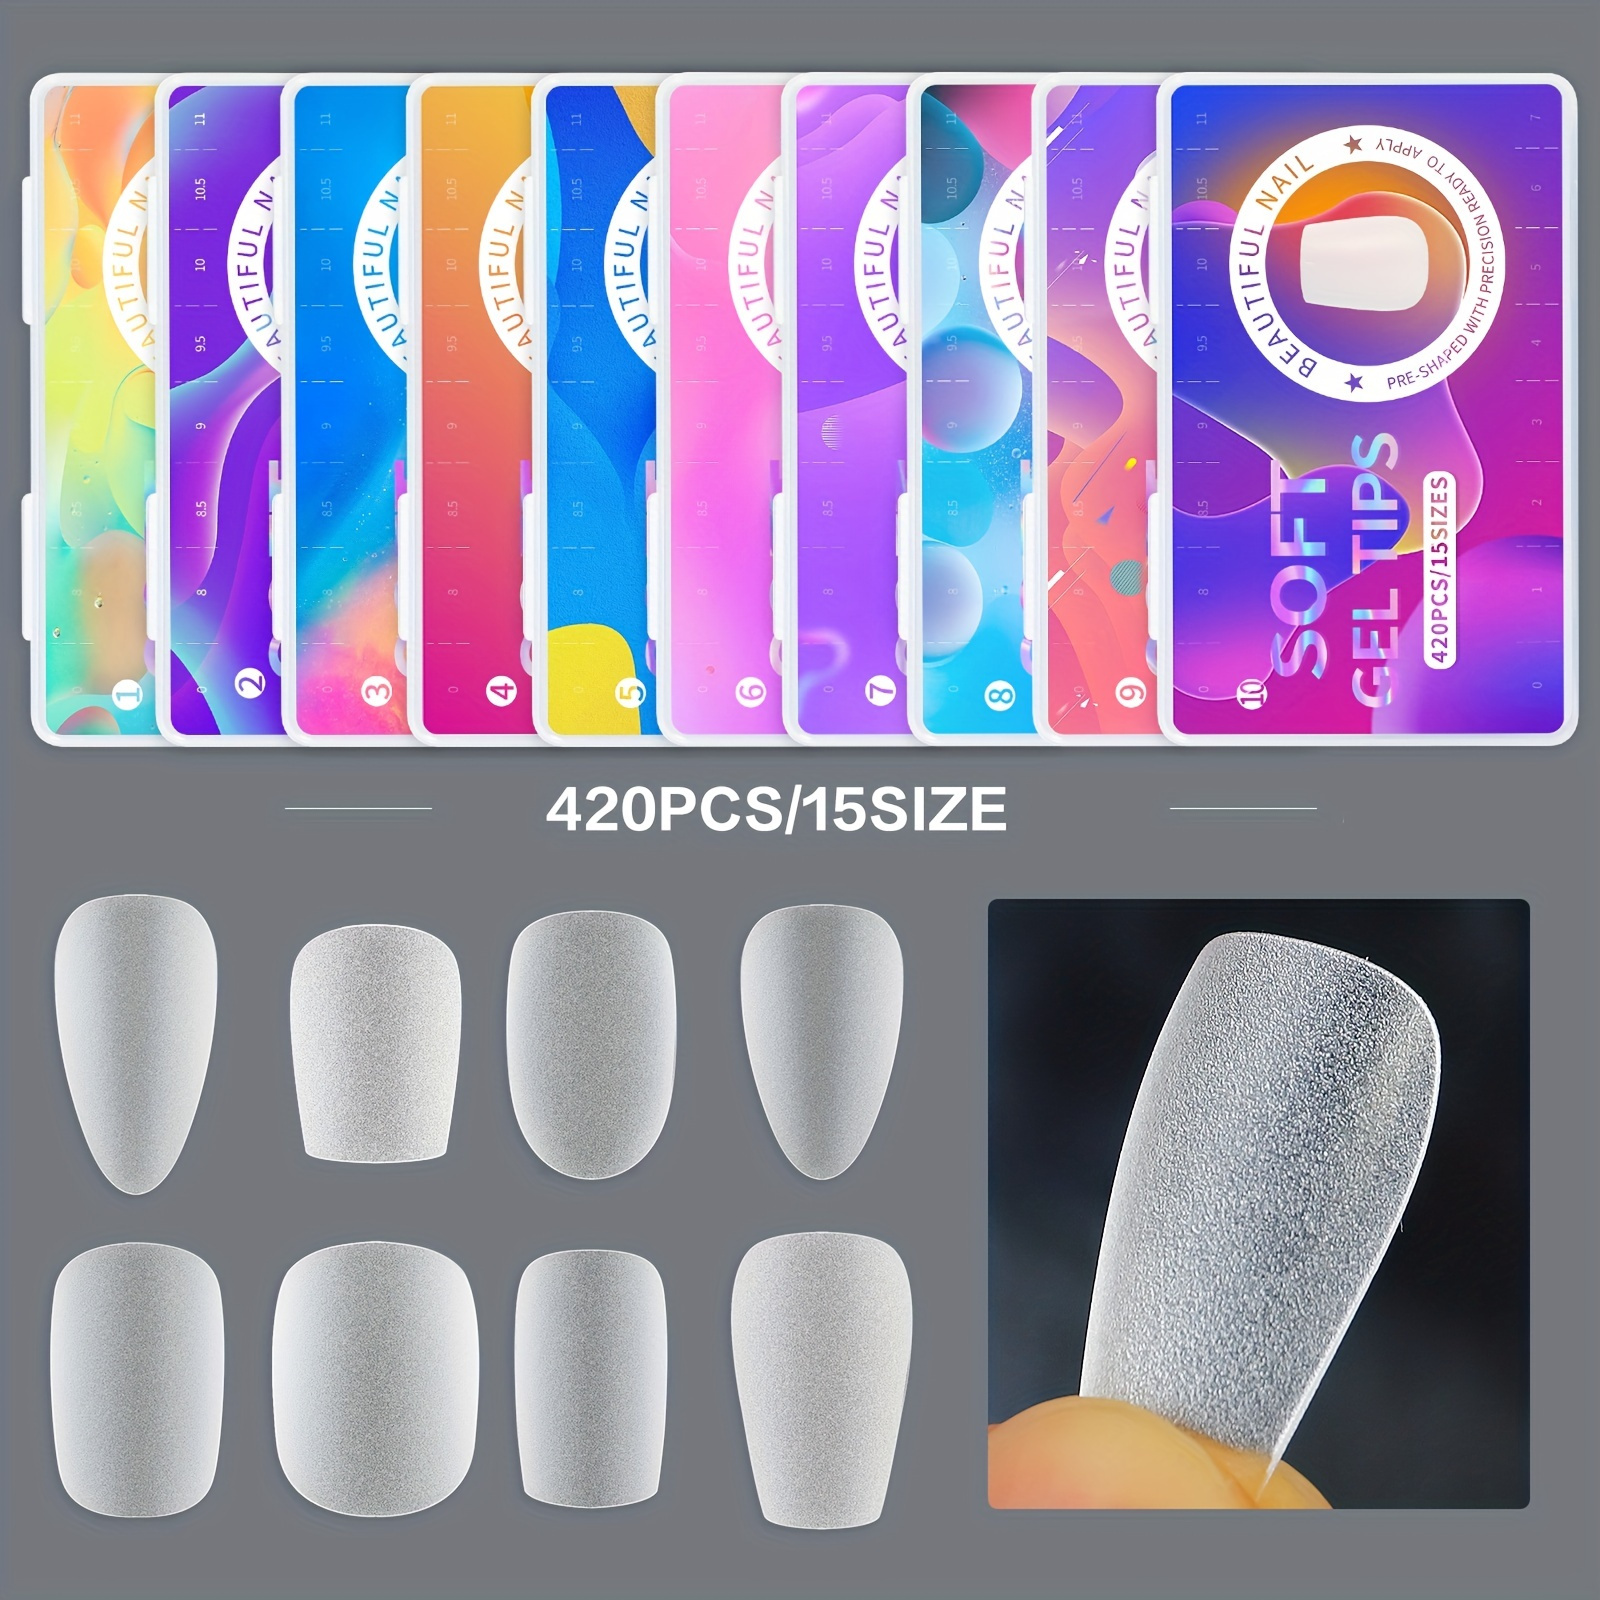 

420 Pcs Acrylic Press On Nails - Coffin Shaped Artificial Fake Nail Tips For Extension Manicure Tool - Long Lasting And Durable